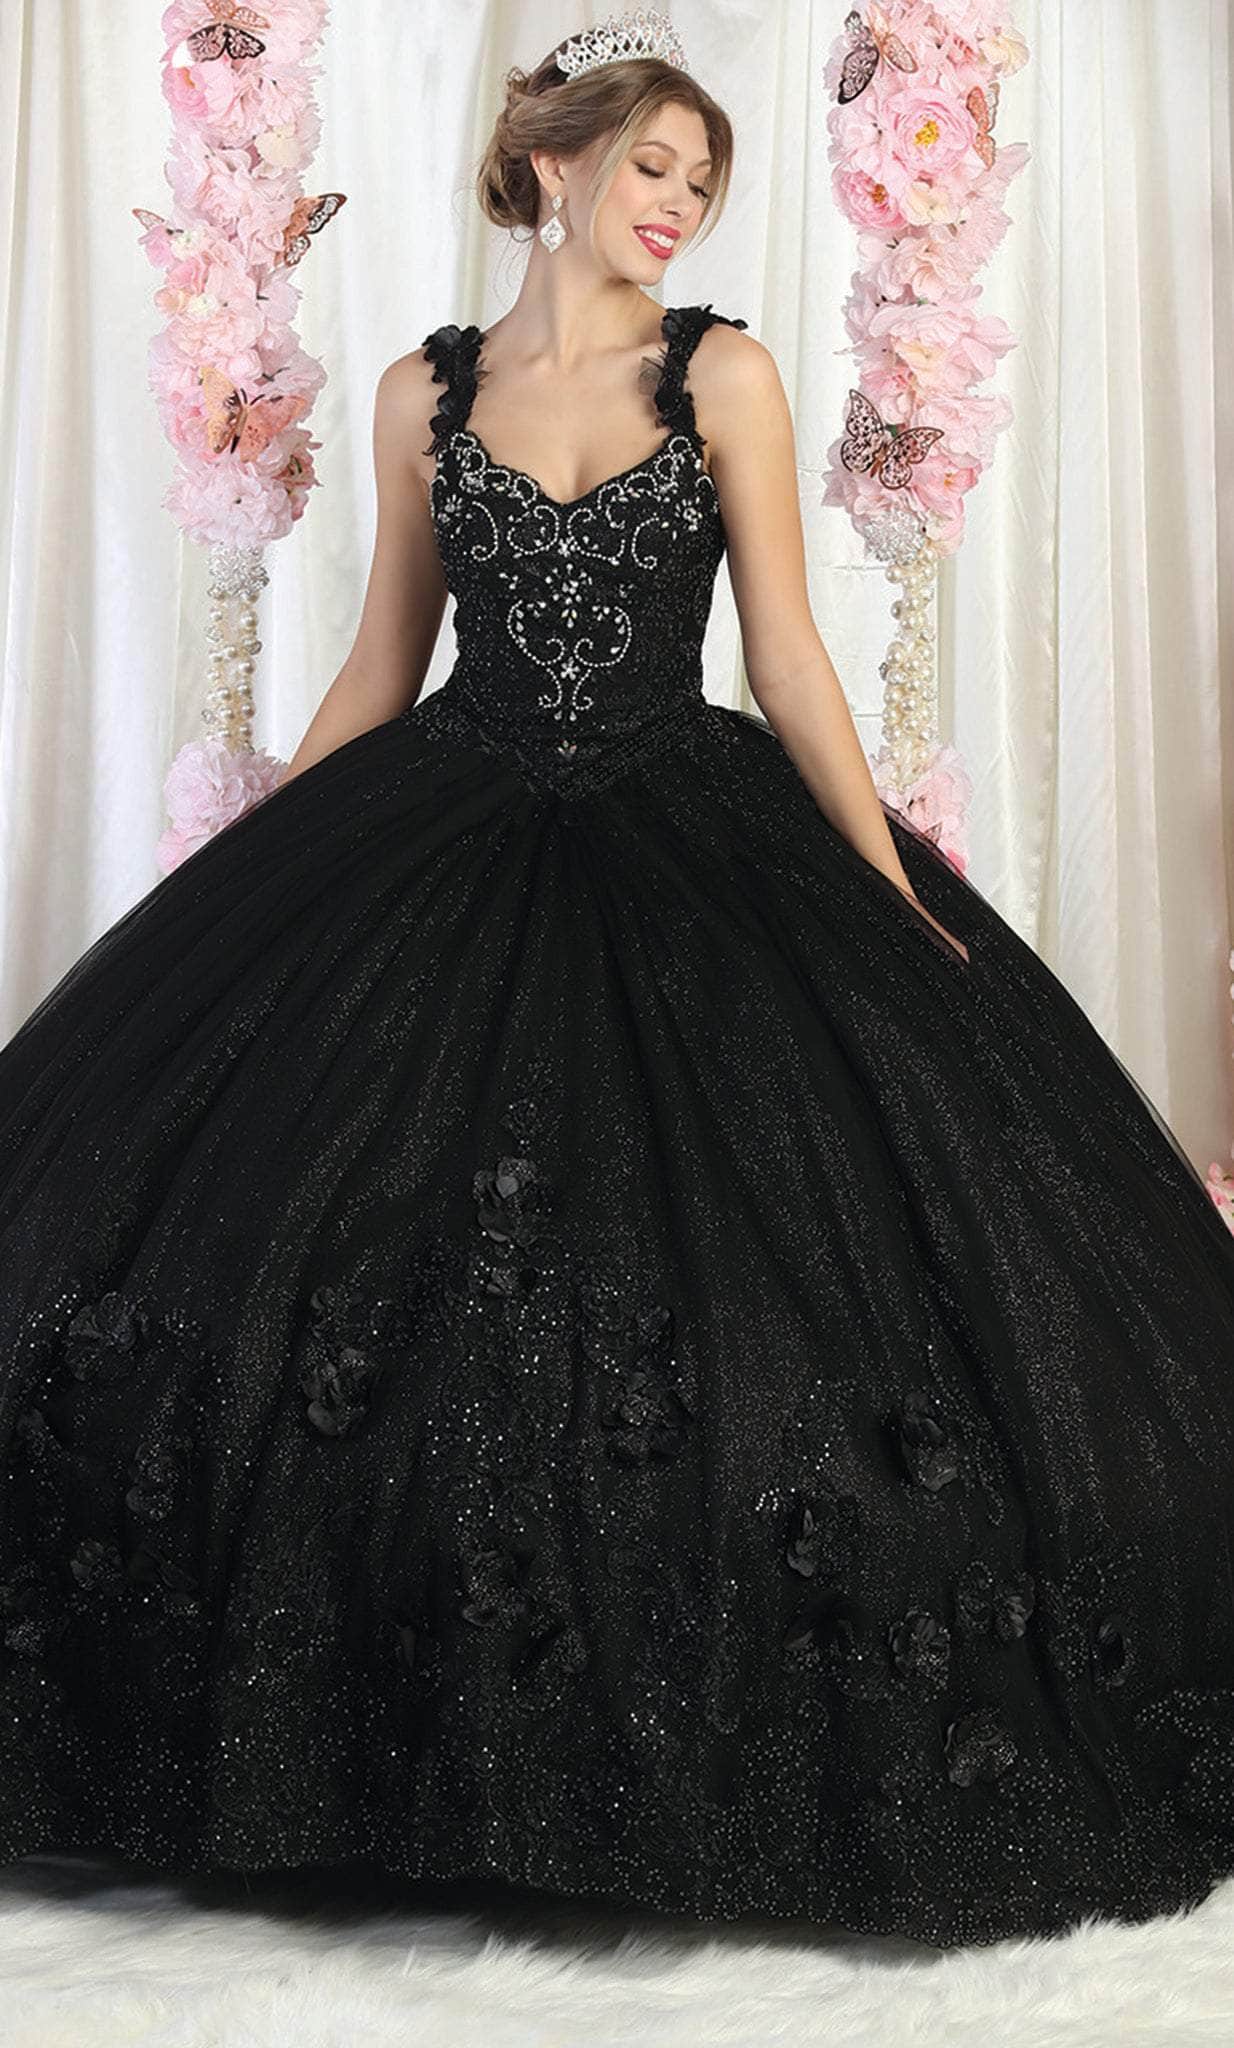 Image of May Queen LK180 - Floral Applique Quinceanera Ballgown